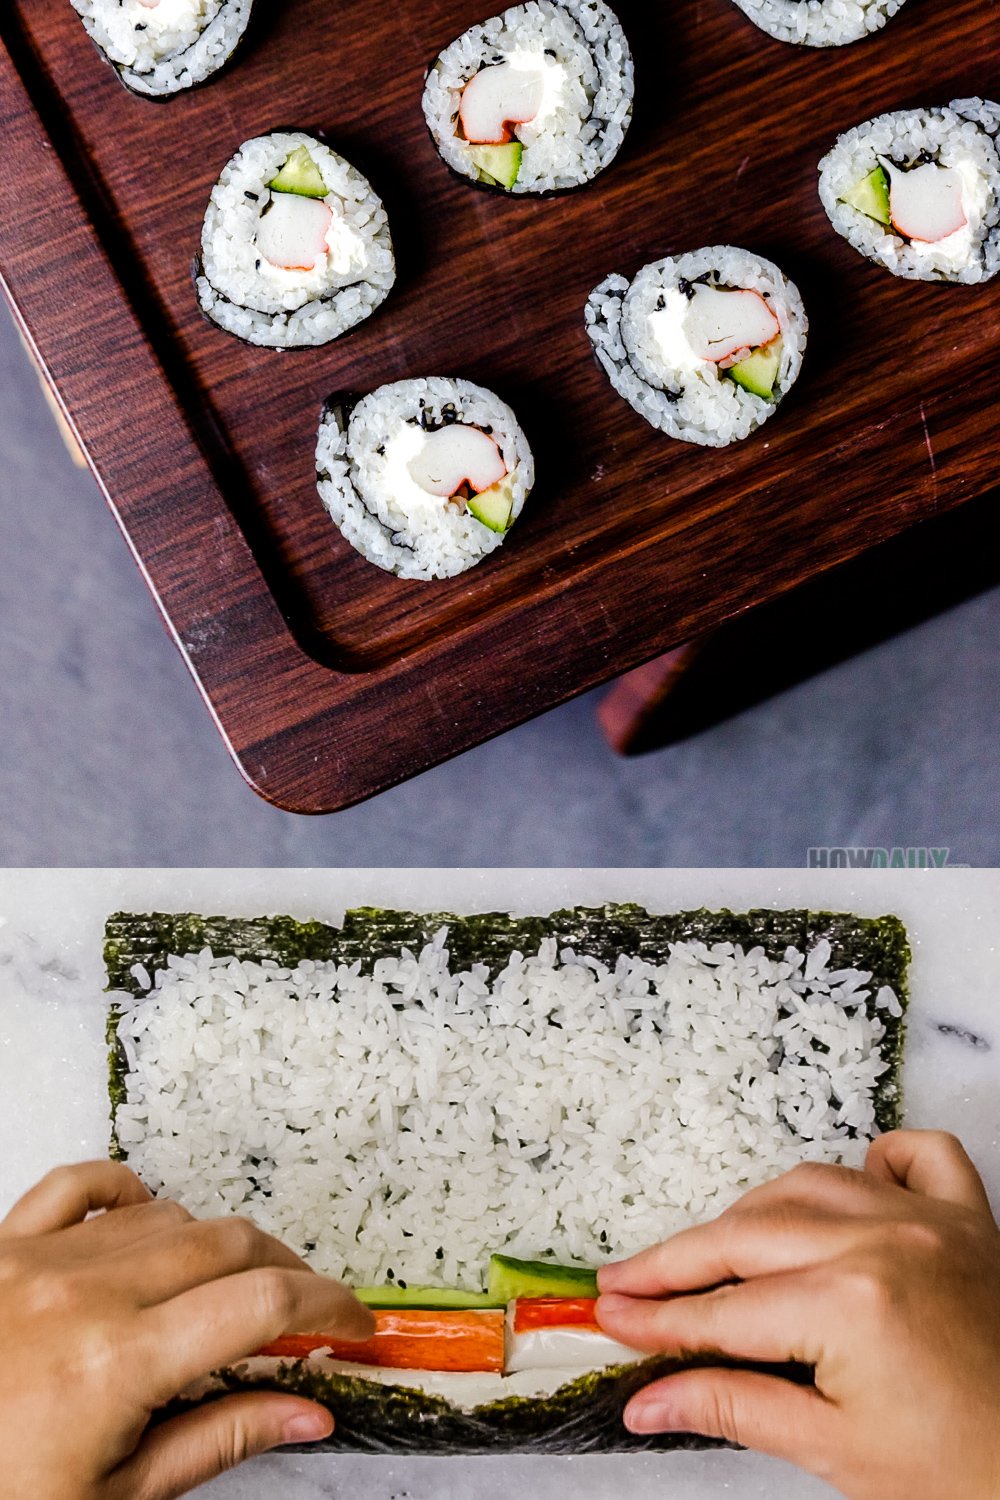 Homemade Sushi 23 - How to Roll Sushi by Hand